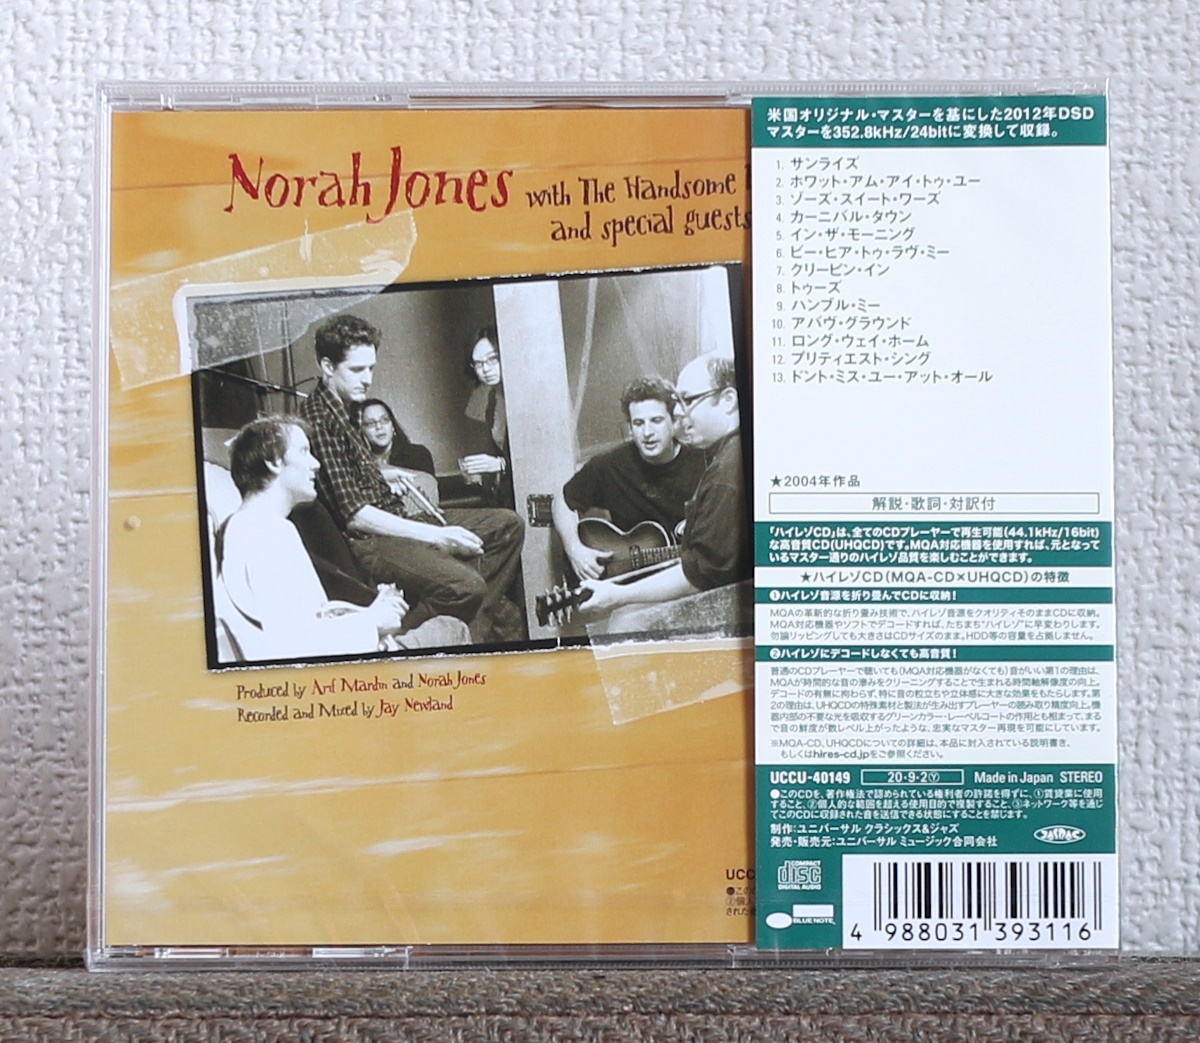  height sound quality MQA-CD/ Nora * Jones /Norah Jones/Feels Like Home/ The * band /The Band/Brian Blade/Dolly Parton/Blue Note/Hi-Res